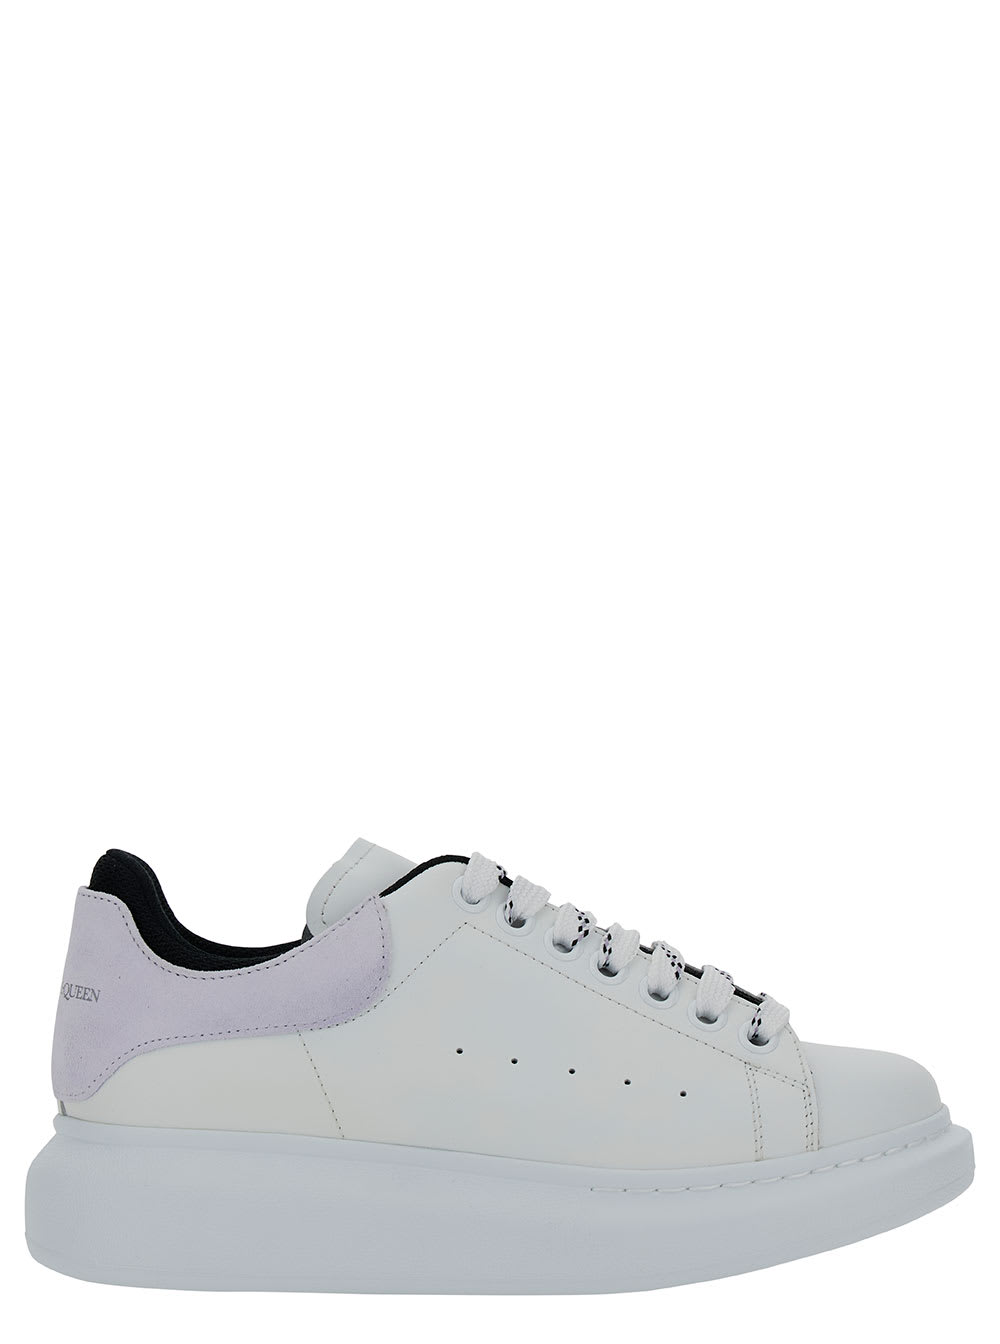 Alexander Mcqueen White Low Top Sneakers With Double Heel Tab And Oversized Platform In Leather Woman In Multicolor